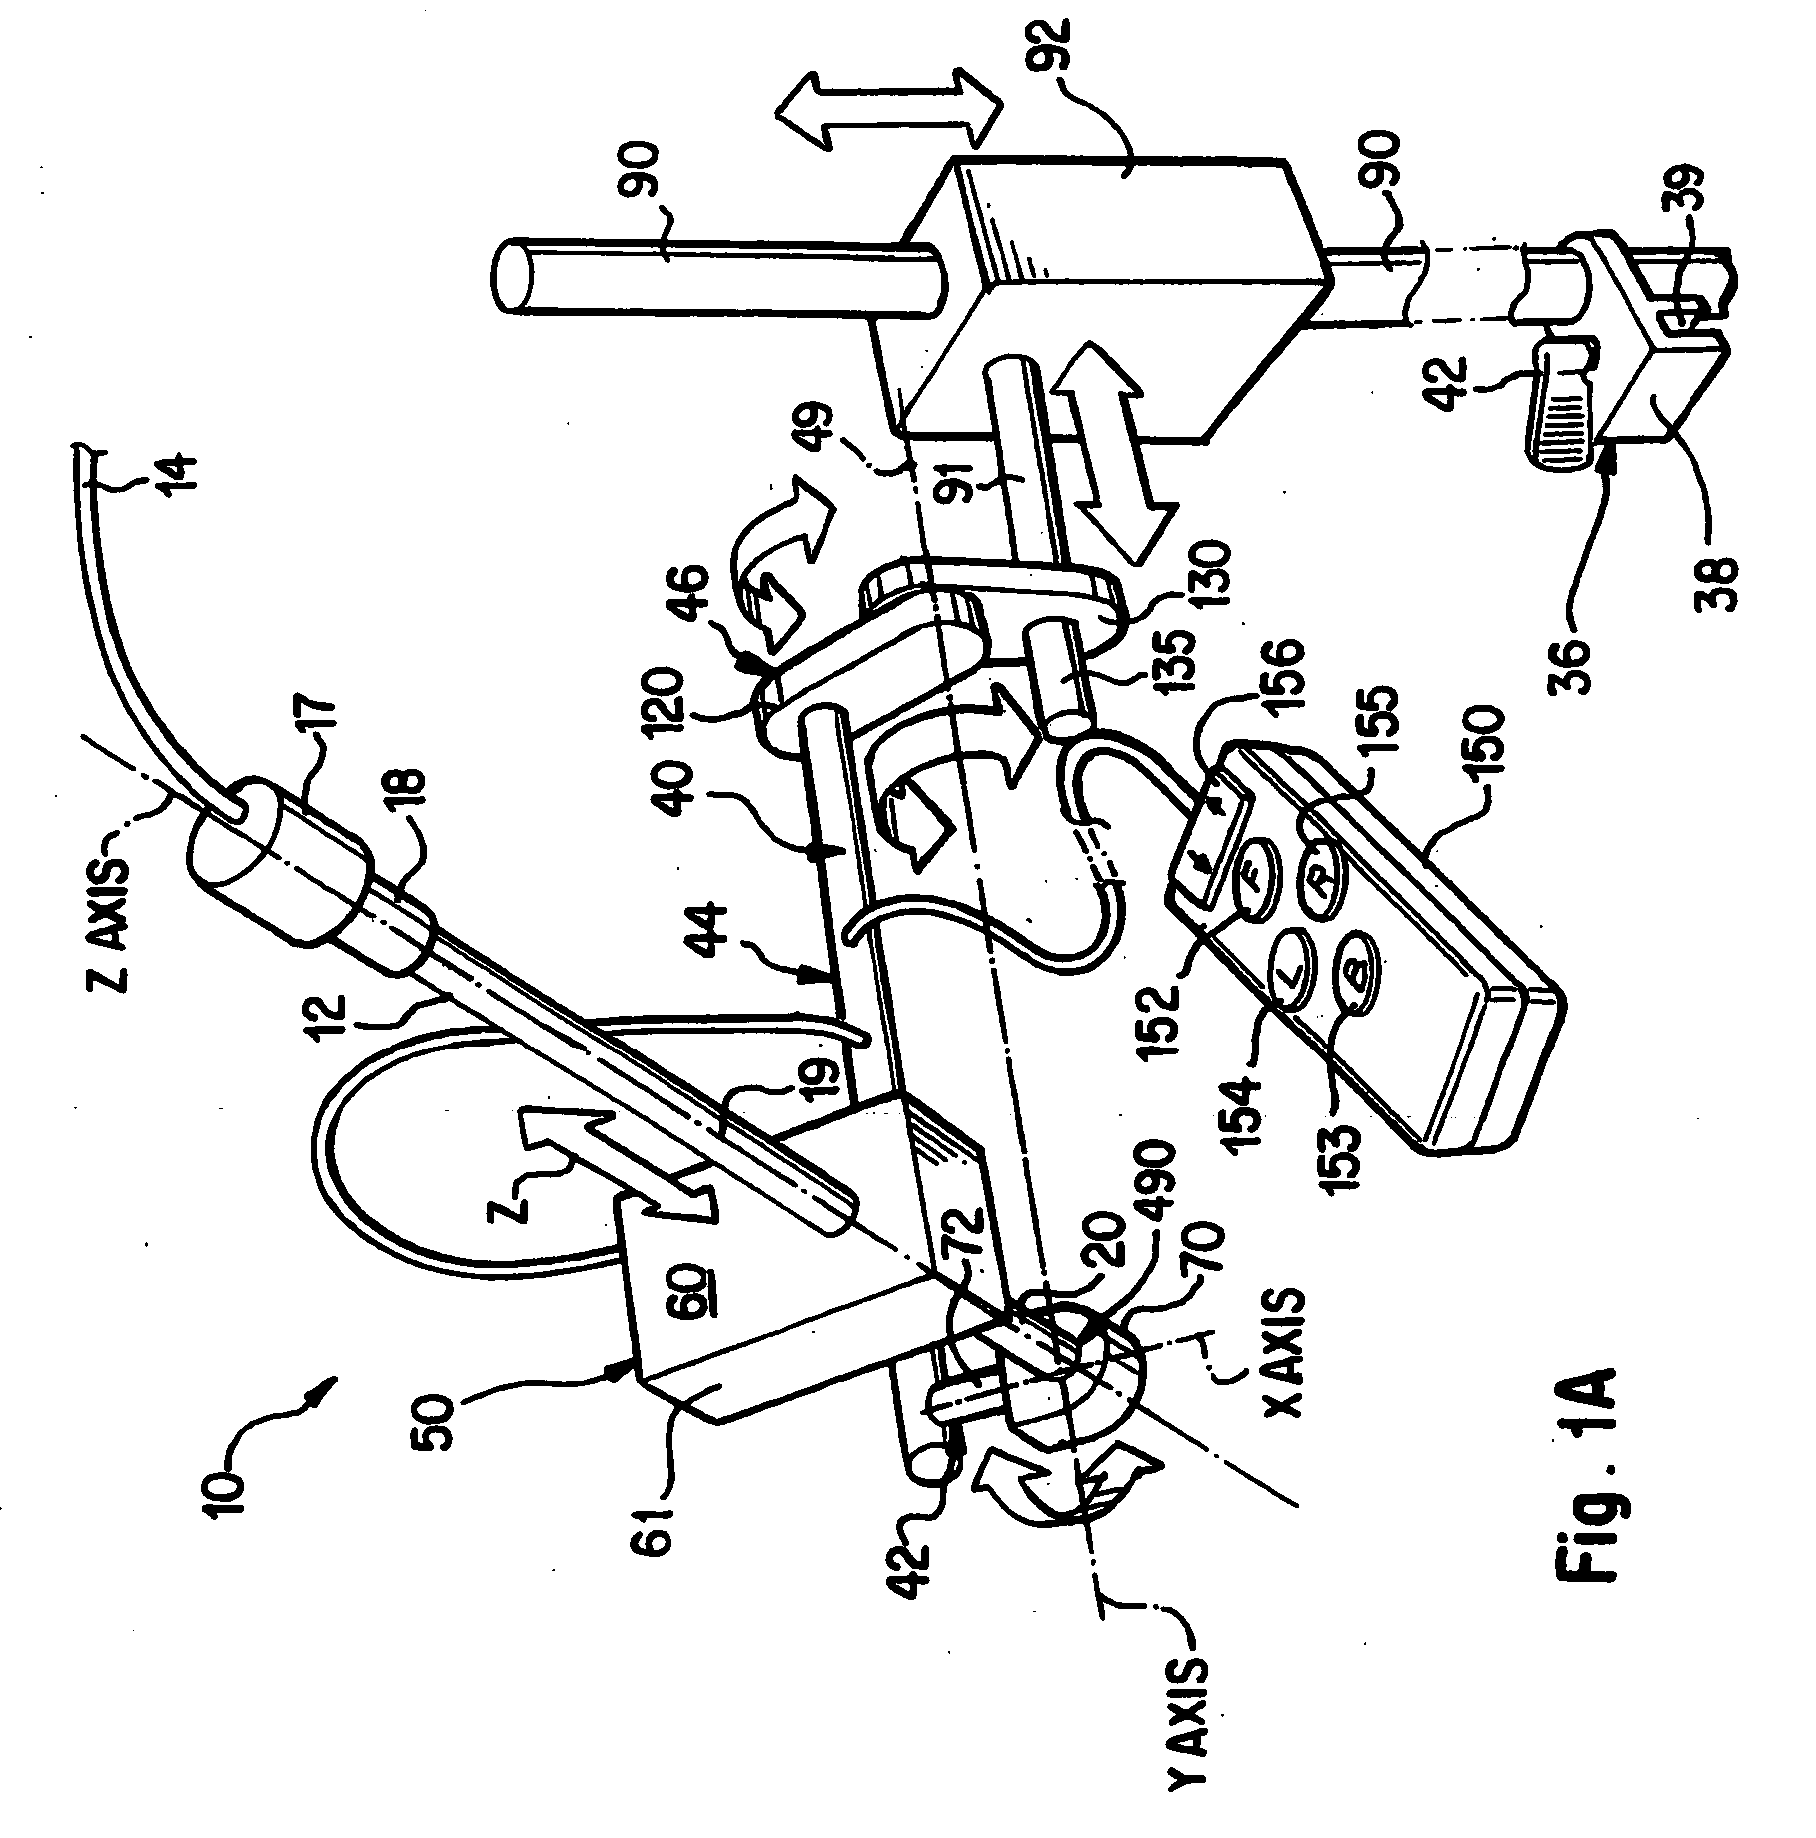 Apparatus for positioning a medical instrument